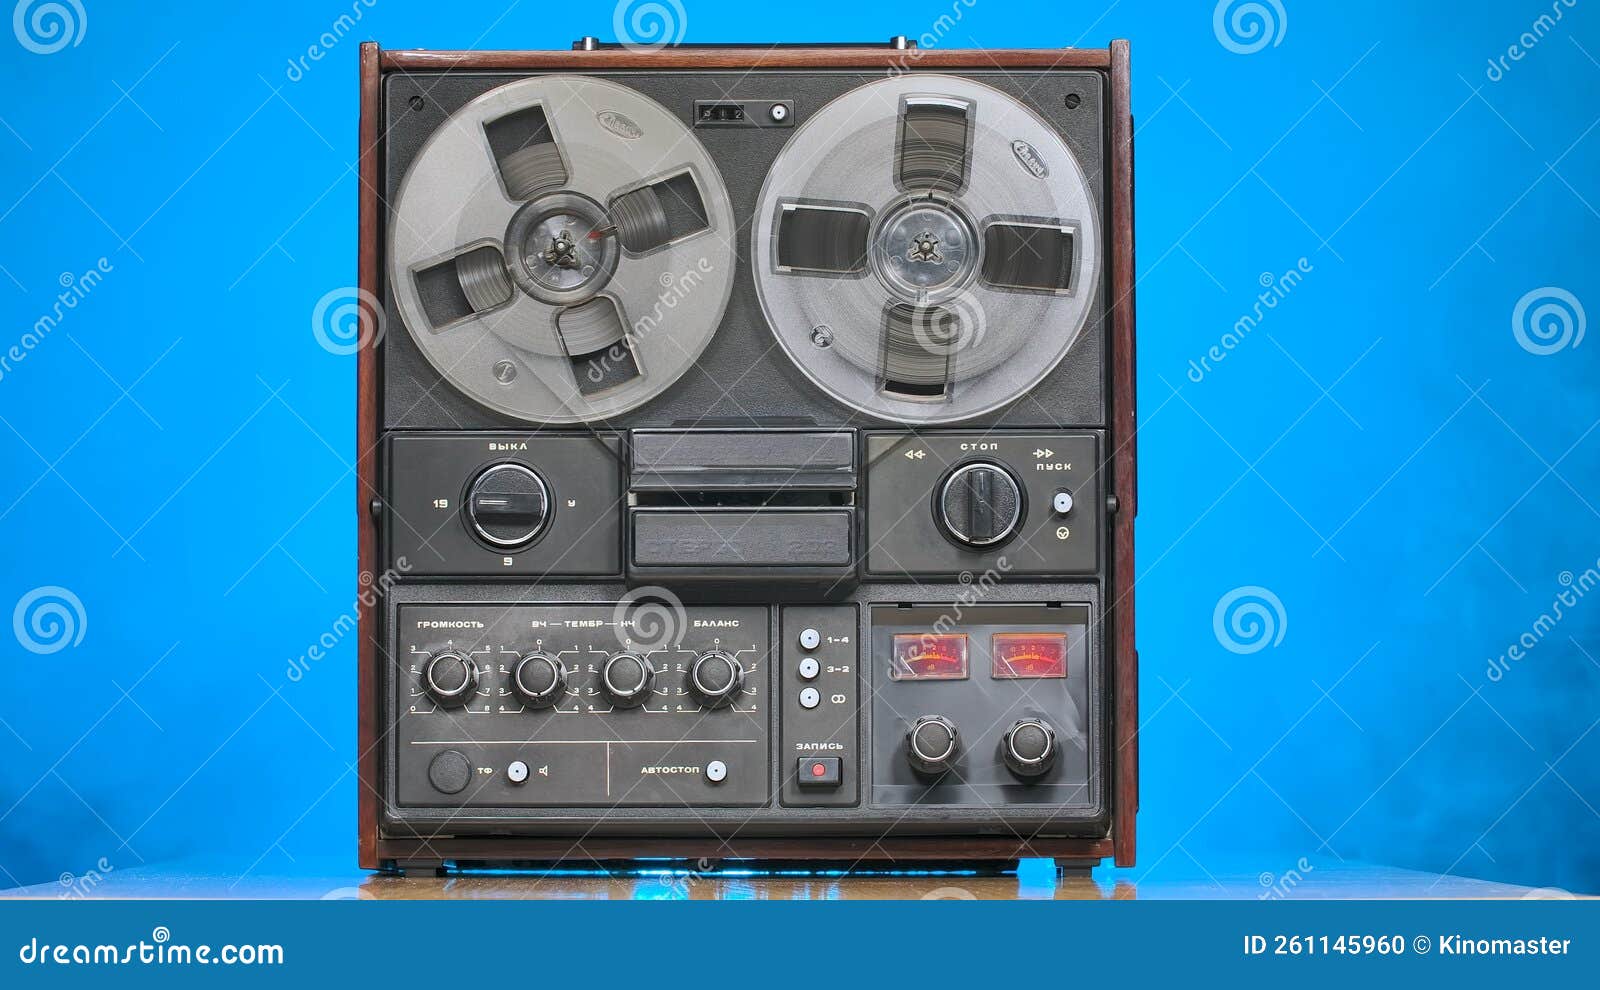 https://thumbs.dreamstime.com/z/reel-to-reel-tape-recorder-blue-studio-background-stops-playing-tape-recorder-vintage-music-player-old-plastic-bobbins-261145960.jpg